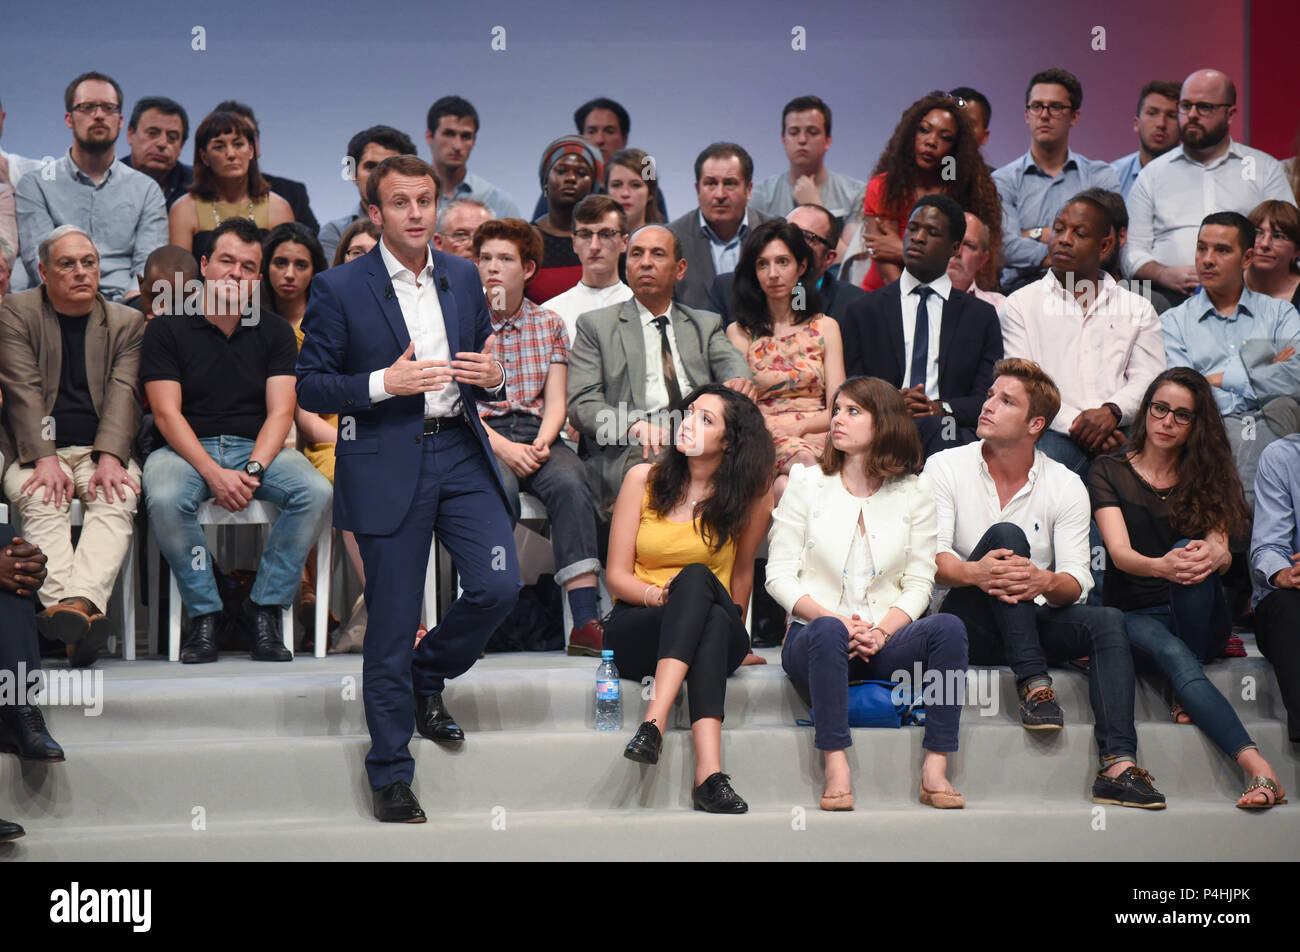 July 12, 2016 - Paris, France: French economy minister Emmanuel Macron holds the first political rally of his movement 'En Marche!' ('On the Move!'), at the Maison de la Mutualite, an event widely seen as a prelude to a run for the 2017 presidential election. Emmanuel Macron tient son premier grand rassemblement politique avec son mouvement 'En Marche!', premier jalon de sa campagne pour la prŽsidentielle de 2017. Stock Photo